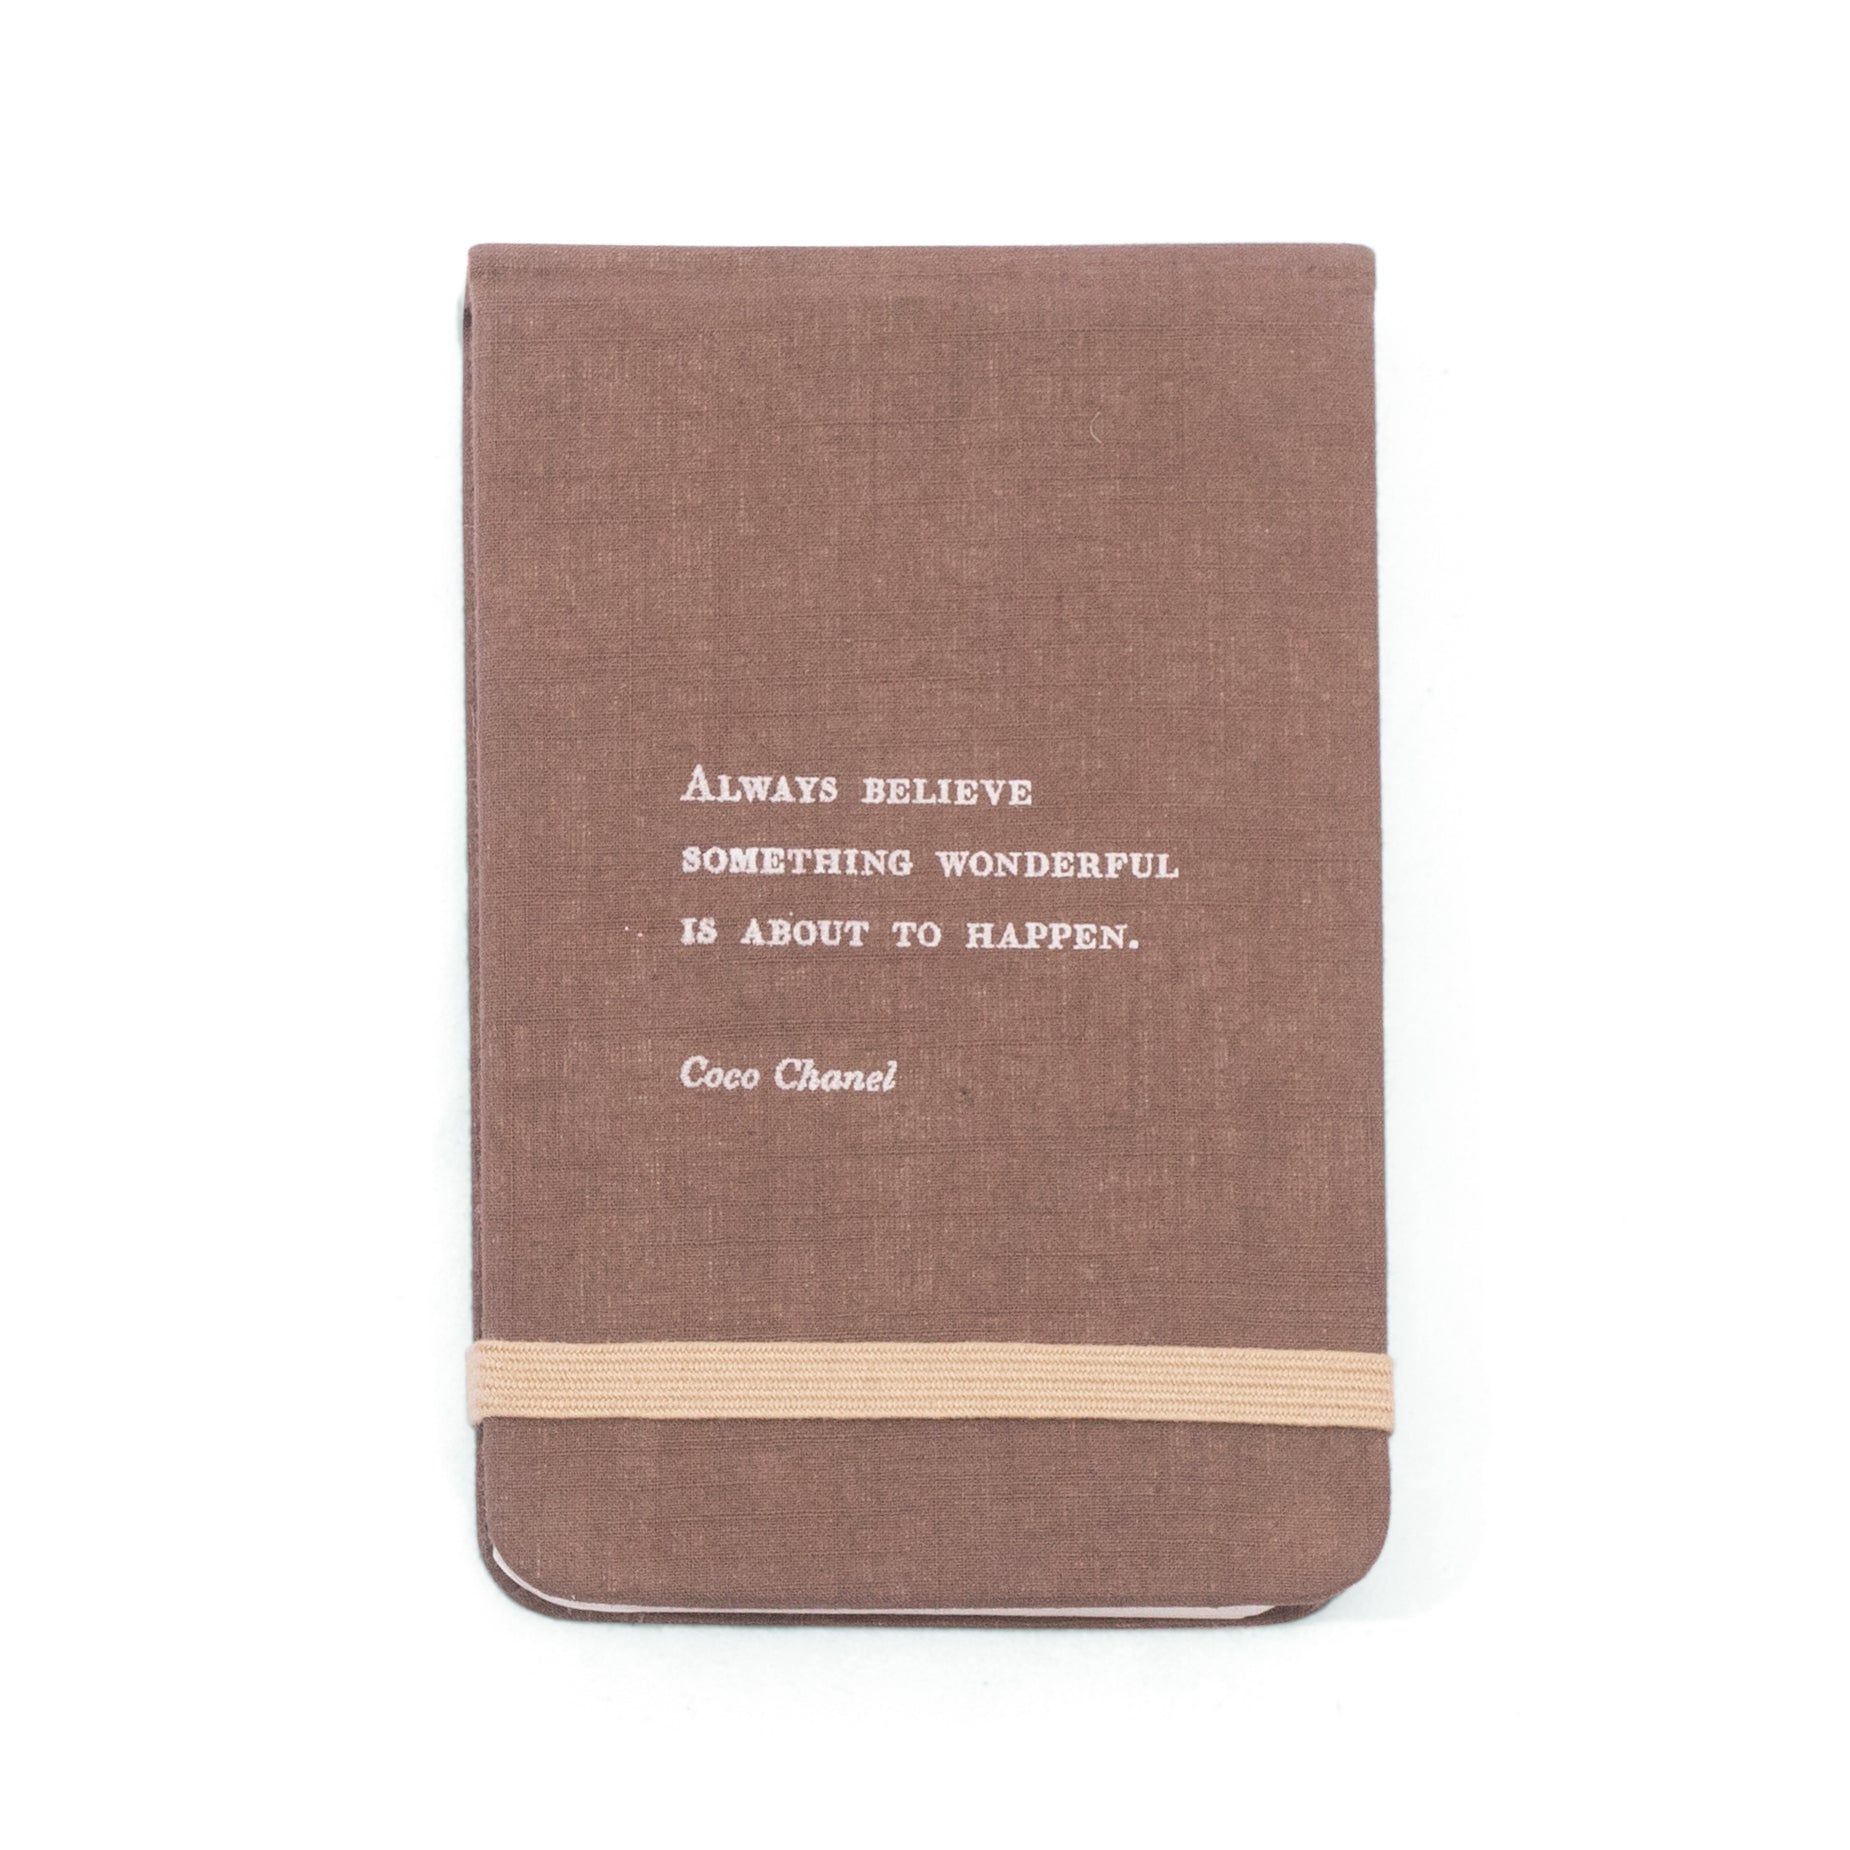 Coco Chanel Fabric Notebook | Sourced from Local Artists | Sugarboo & Co.